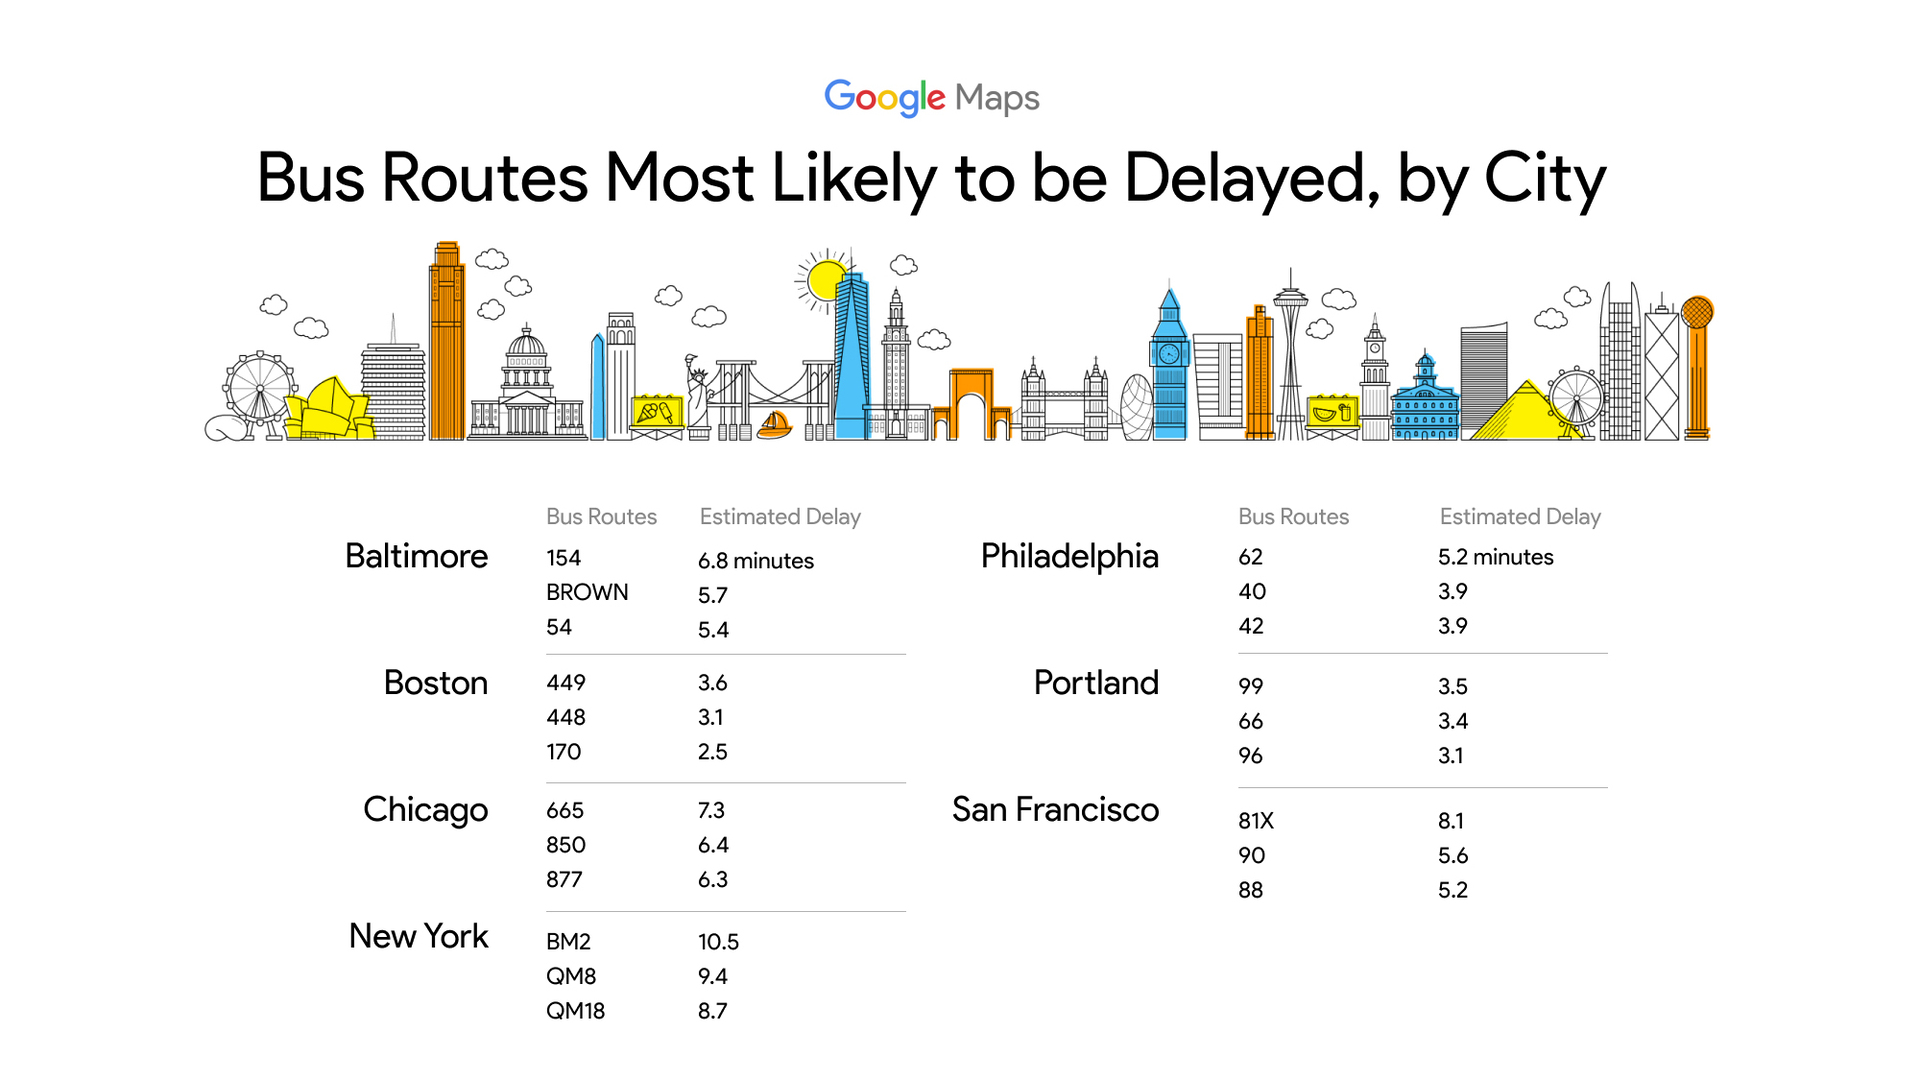 The US cities with the most delays for public transit, according to Google Maps.